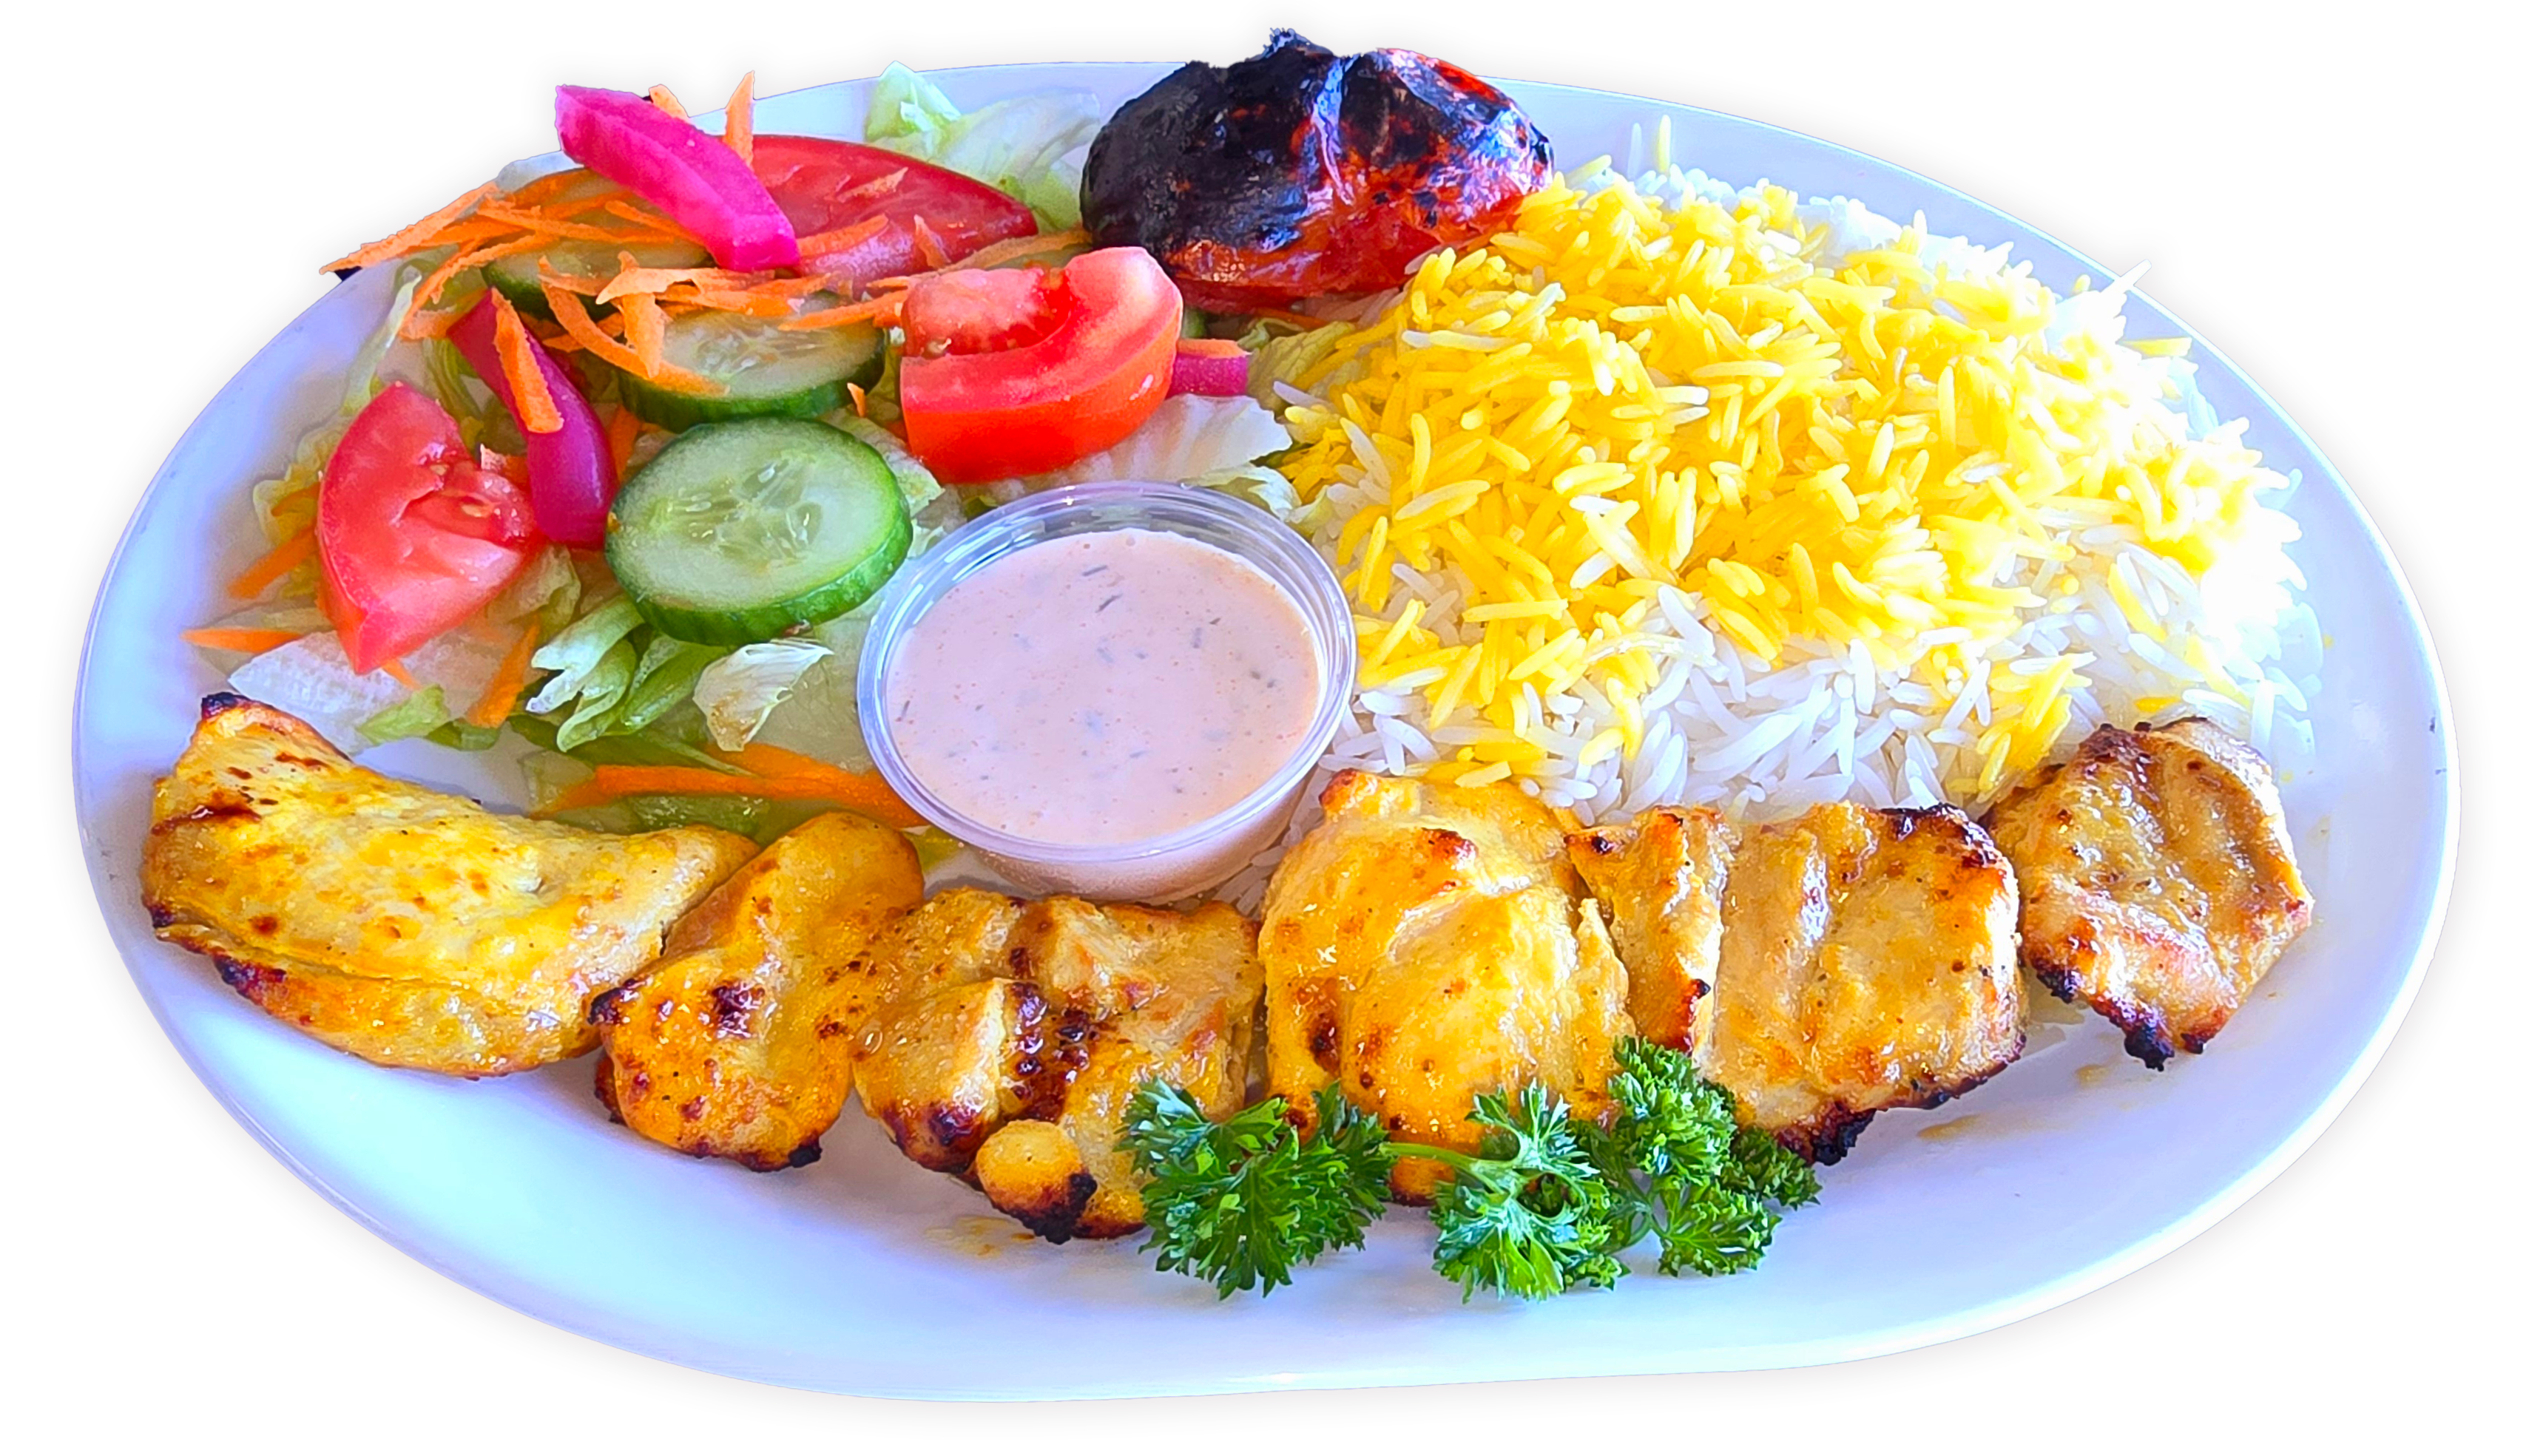 chicken leg kebab with rice, salad, and grilled tomatoes